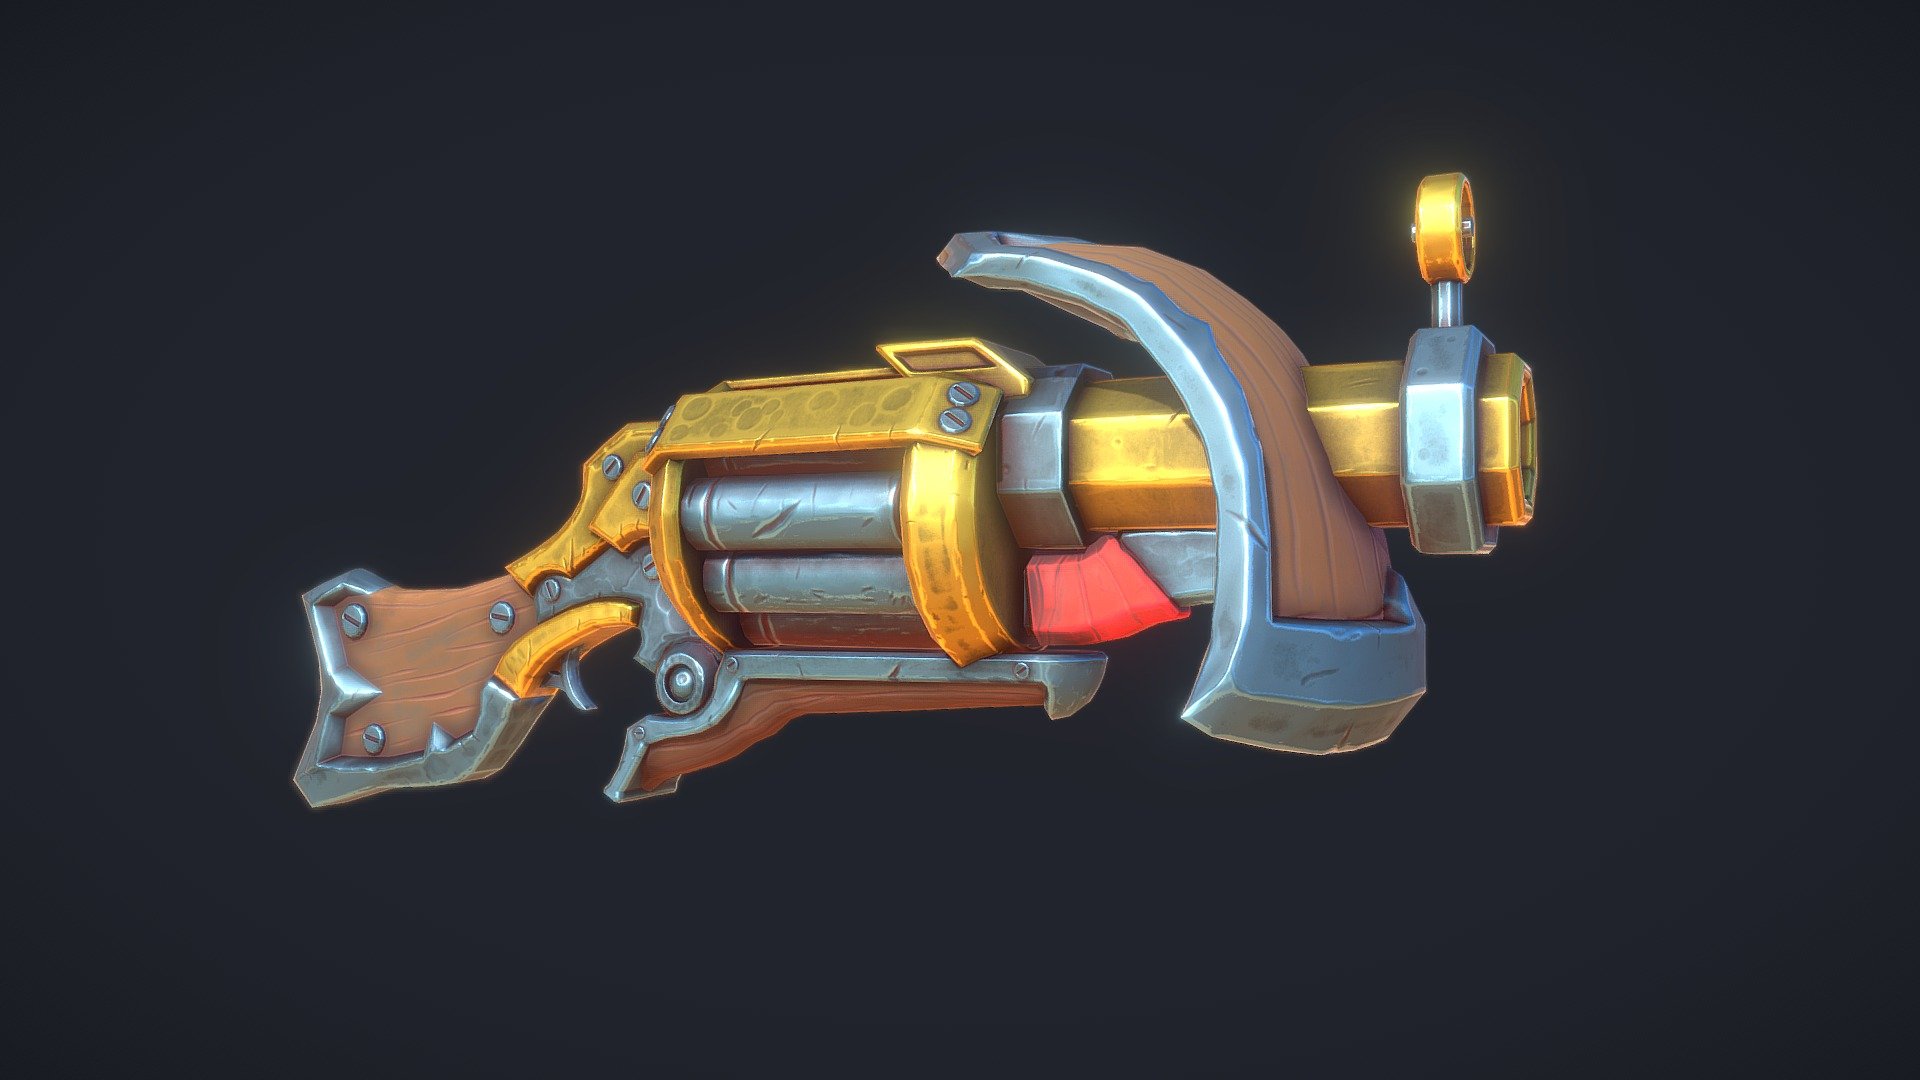 Stylized PBR Rifle, made this to practice creating stylized props in Substance Painter.
Based on the concept op the Volatile Thunderstick from World of Warcraft 3d model